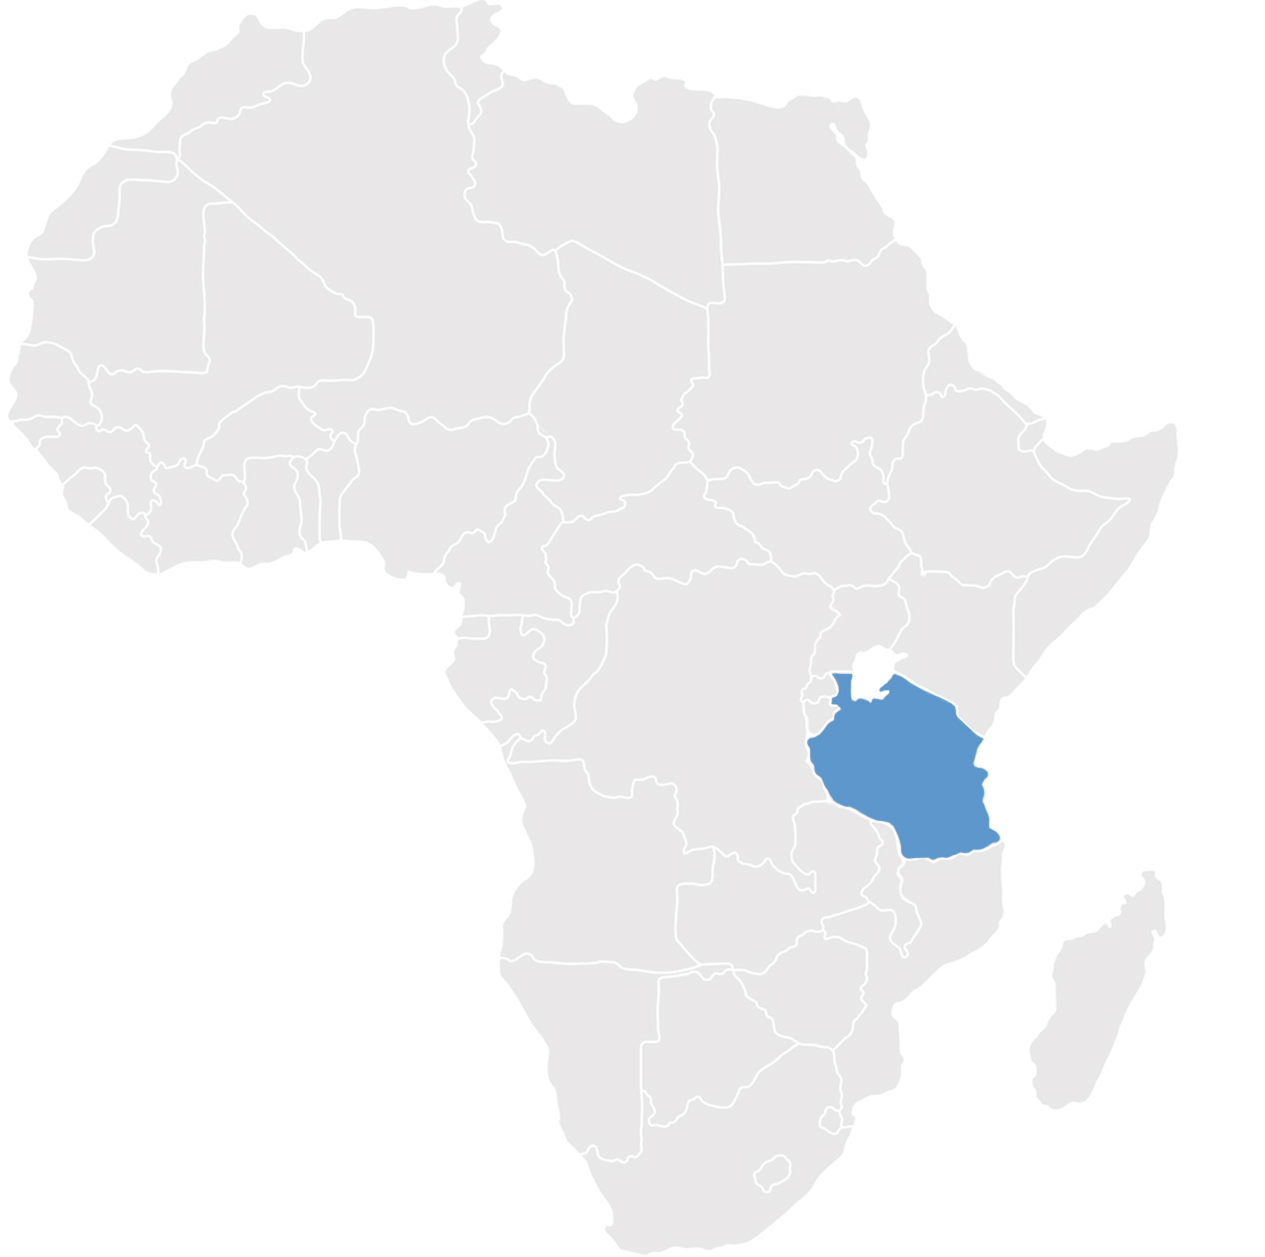 Gray map of Africa with Tanzania in blue